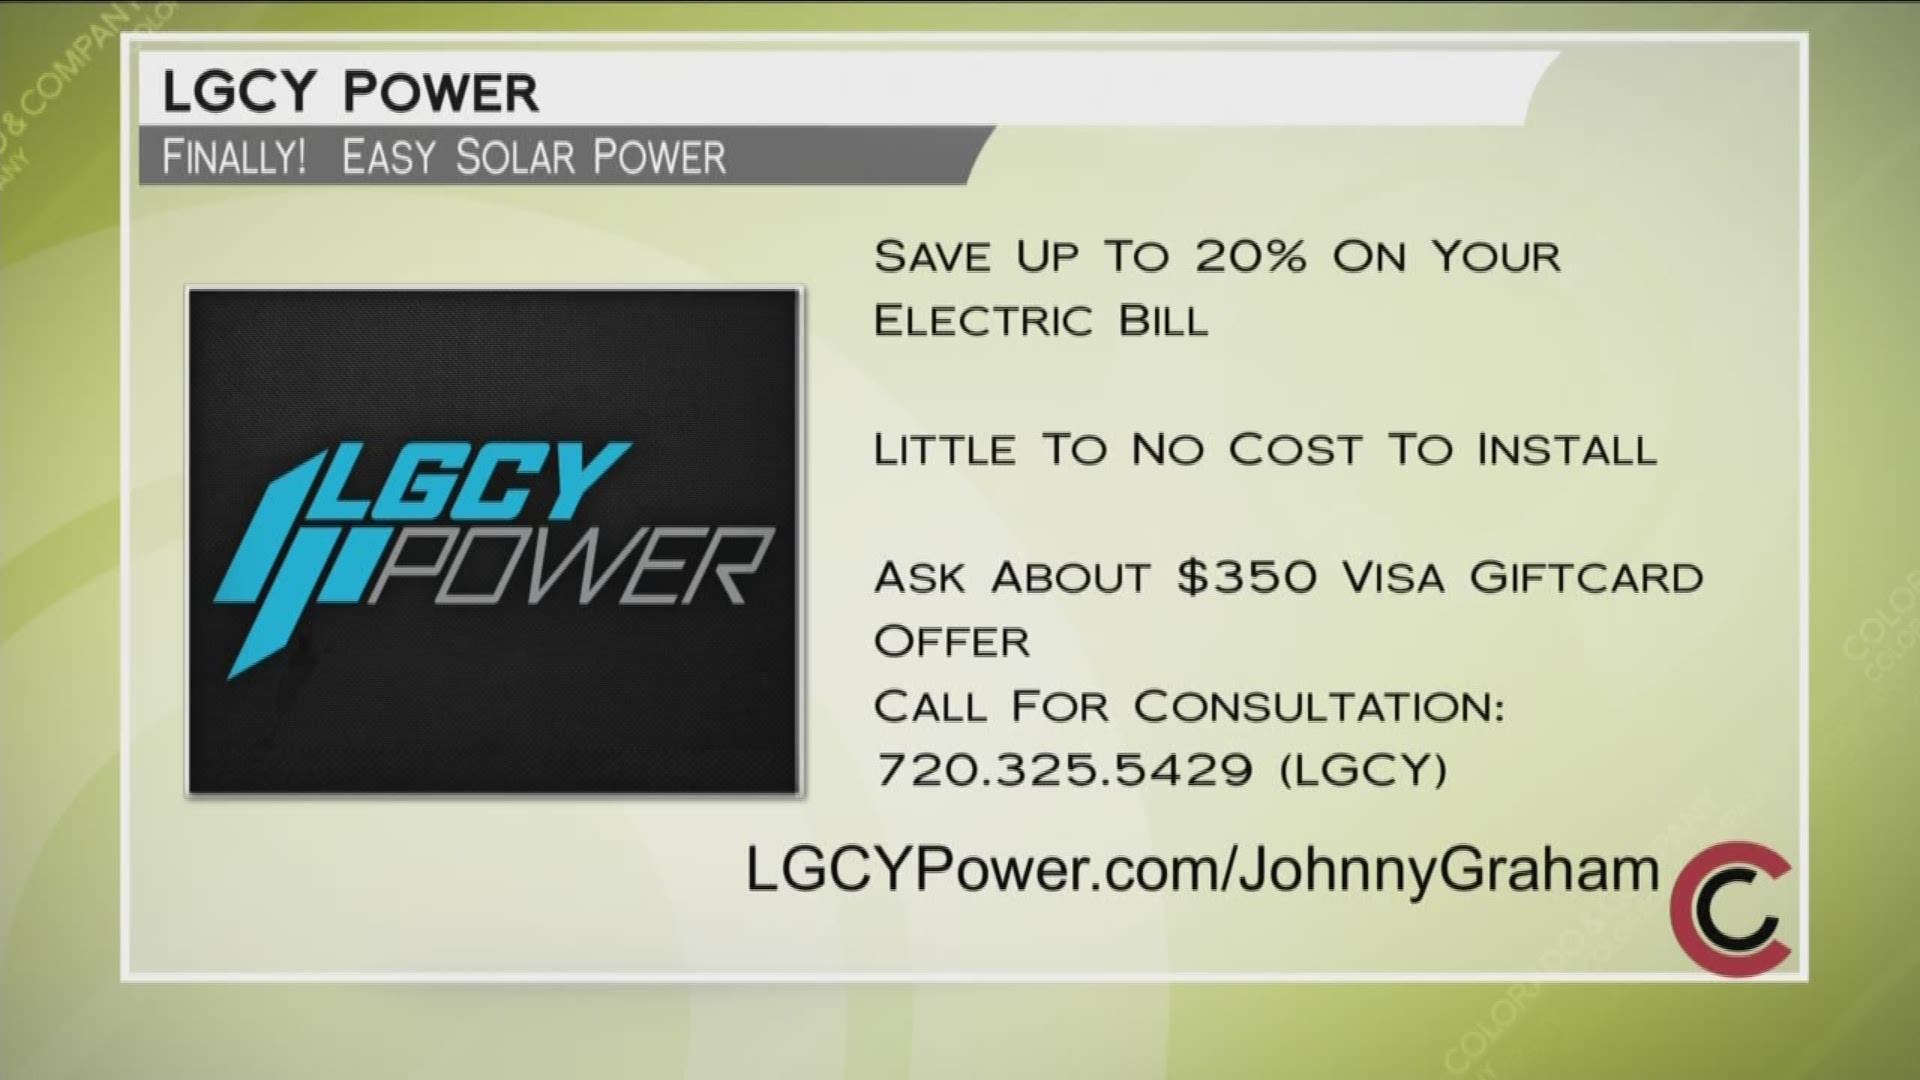 LGCY Power is the newest way to get solar power in your home. You can save between 20 and 40 percent on your electric bill! If your bill is higher than $120 a month, you could be eligible for a $350 Visa gift card. Most customers have zero out of pocket costs to get started. Learn more at www.LGCYPower.com/JohnnyGraham, or call 720.325.5429.
THIS INTERVIEW HAS COMMERCIAL CONTENT. PRODUCTS AND SERVICES FEATURED APPEAR AS PAID ADVERTISING.